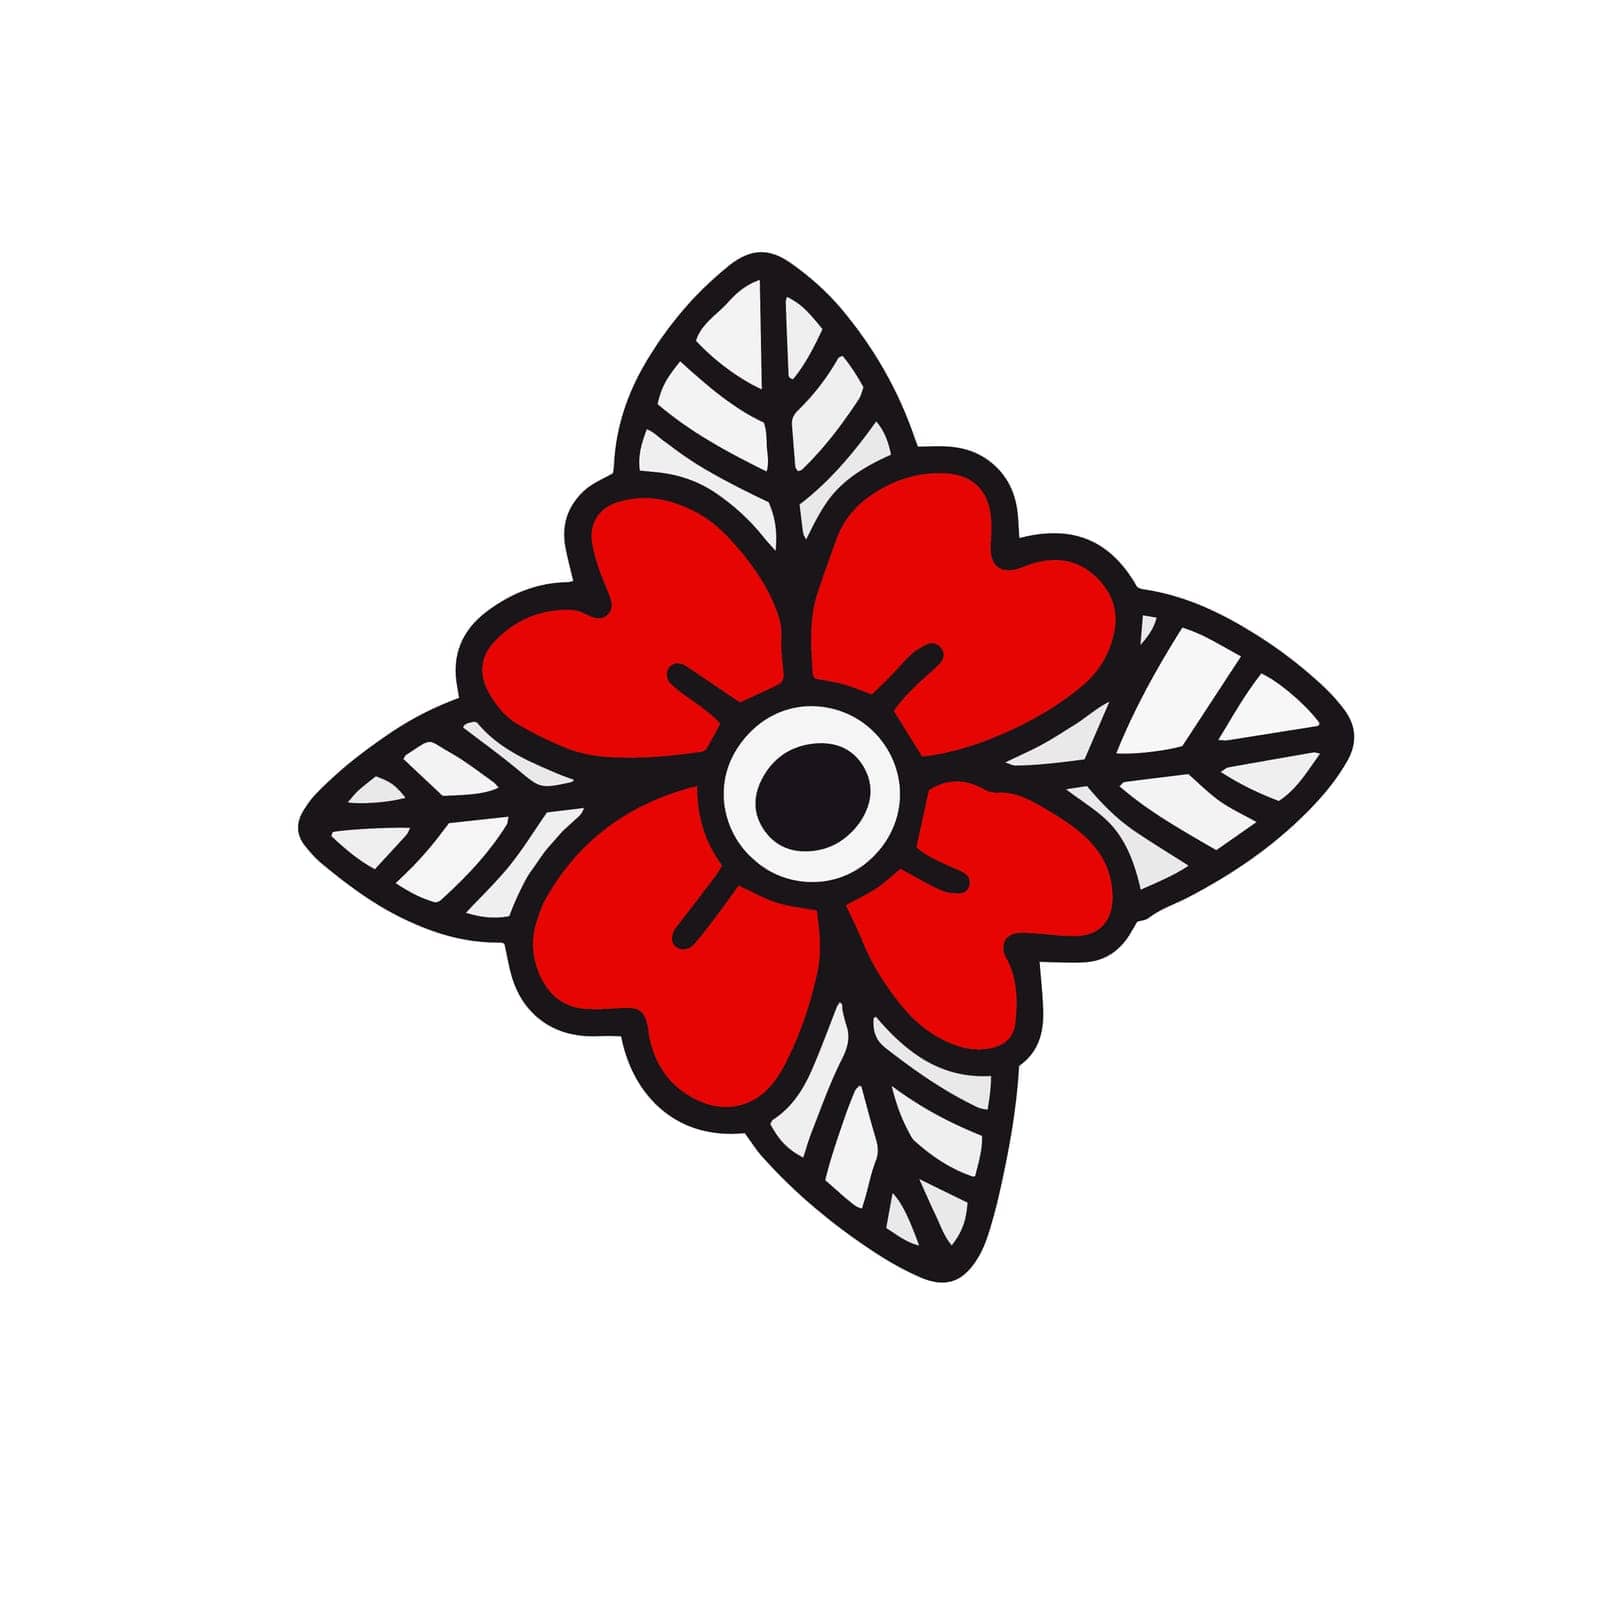 Flower in the style of old school tattoo. Hand-drawn vector illustration in doodle style.